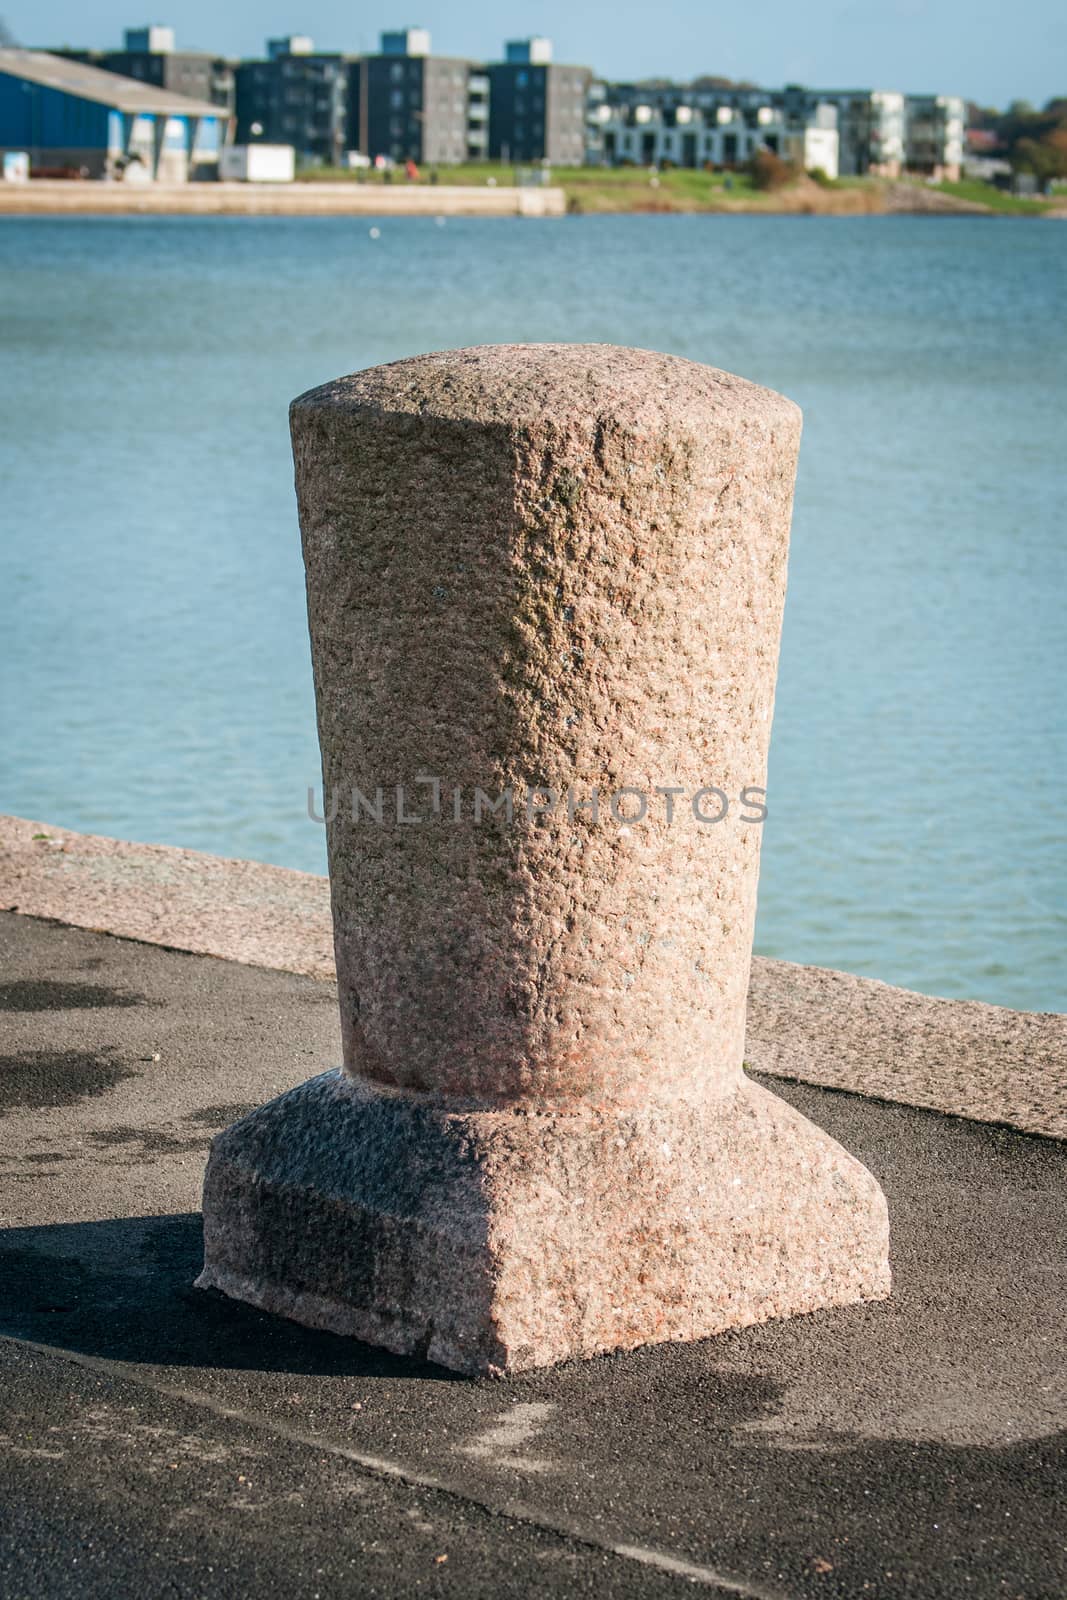 Dock post at the harbor by Sportactive